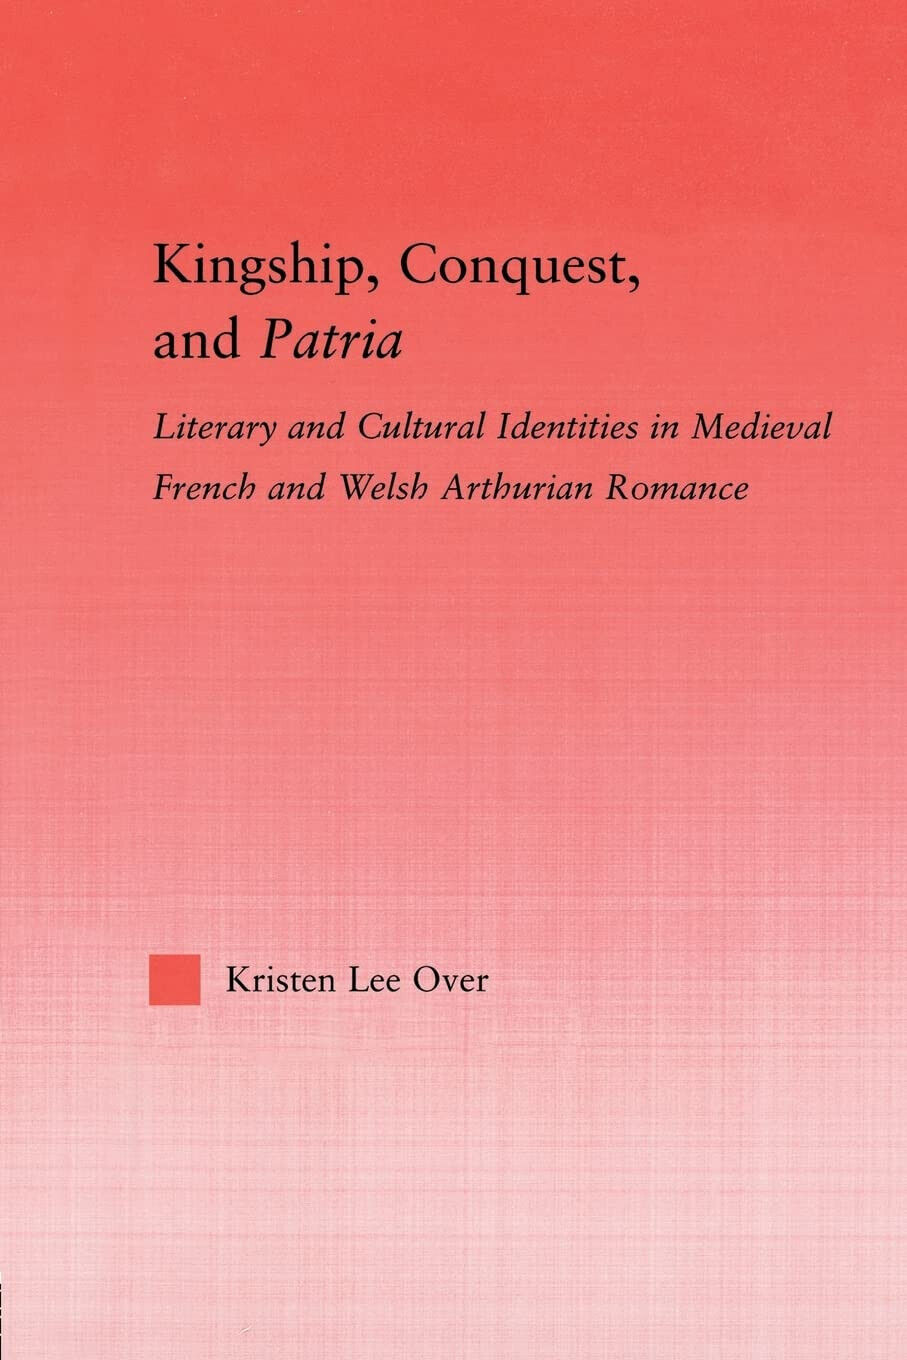 Kingship, Conquest, and Patria - Kristen Lee Over - Routledge, 2013